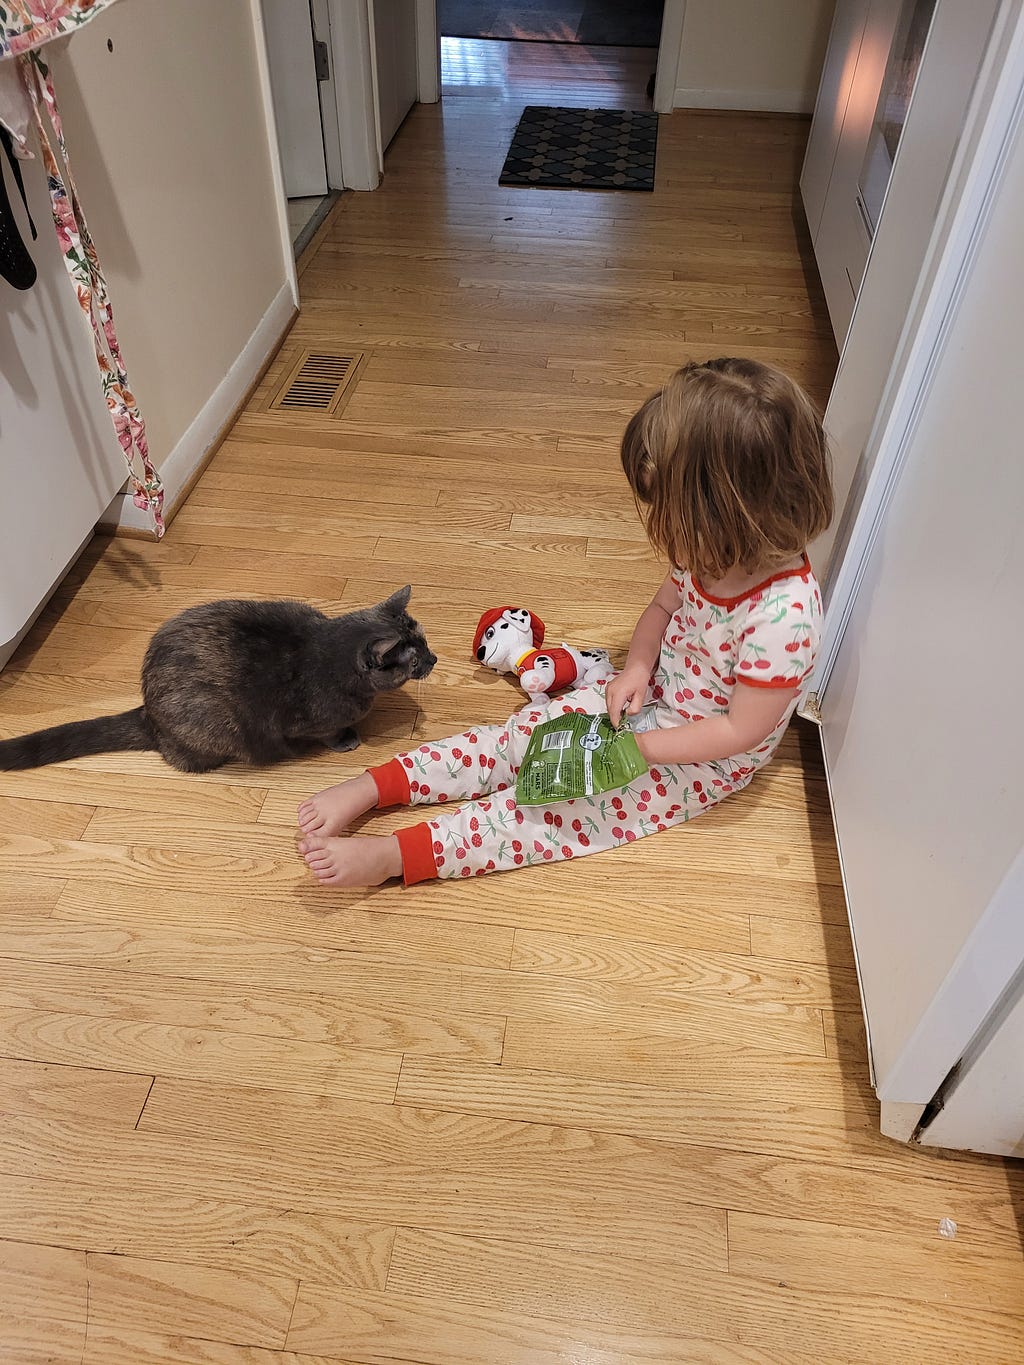 a cat lingers nearby while a toddler in pajamas offers treats.